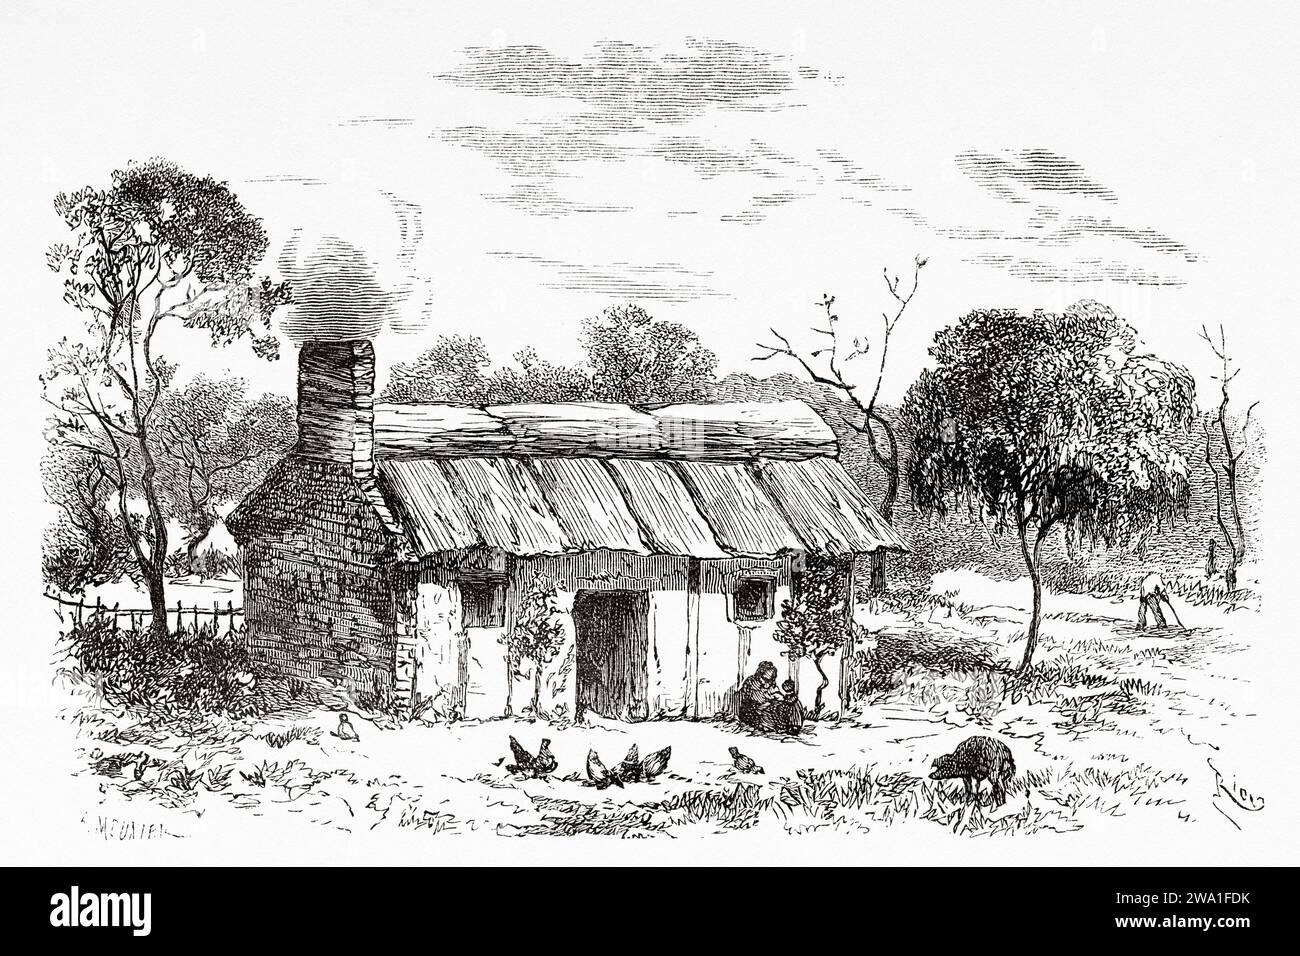 Cabin of a new farmer settler, Bendigo. Victoria, Australia. Six Months in Australia 1878 by Desire Charnay (1828 - 1915) Old 19th century engraving from Le Tour du Monde 1880 Stock Photo